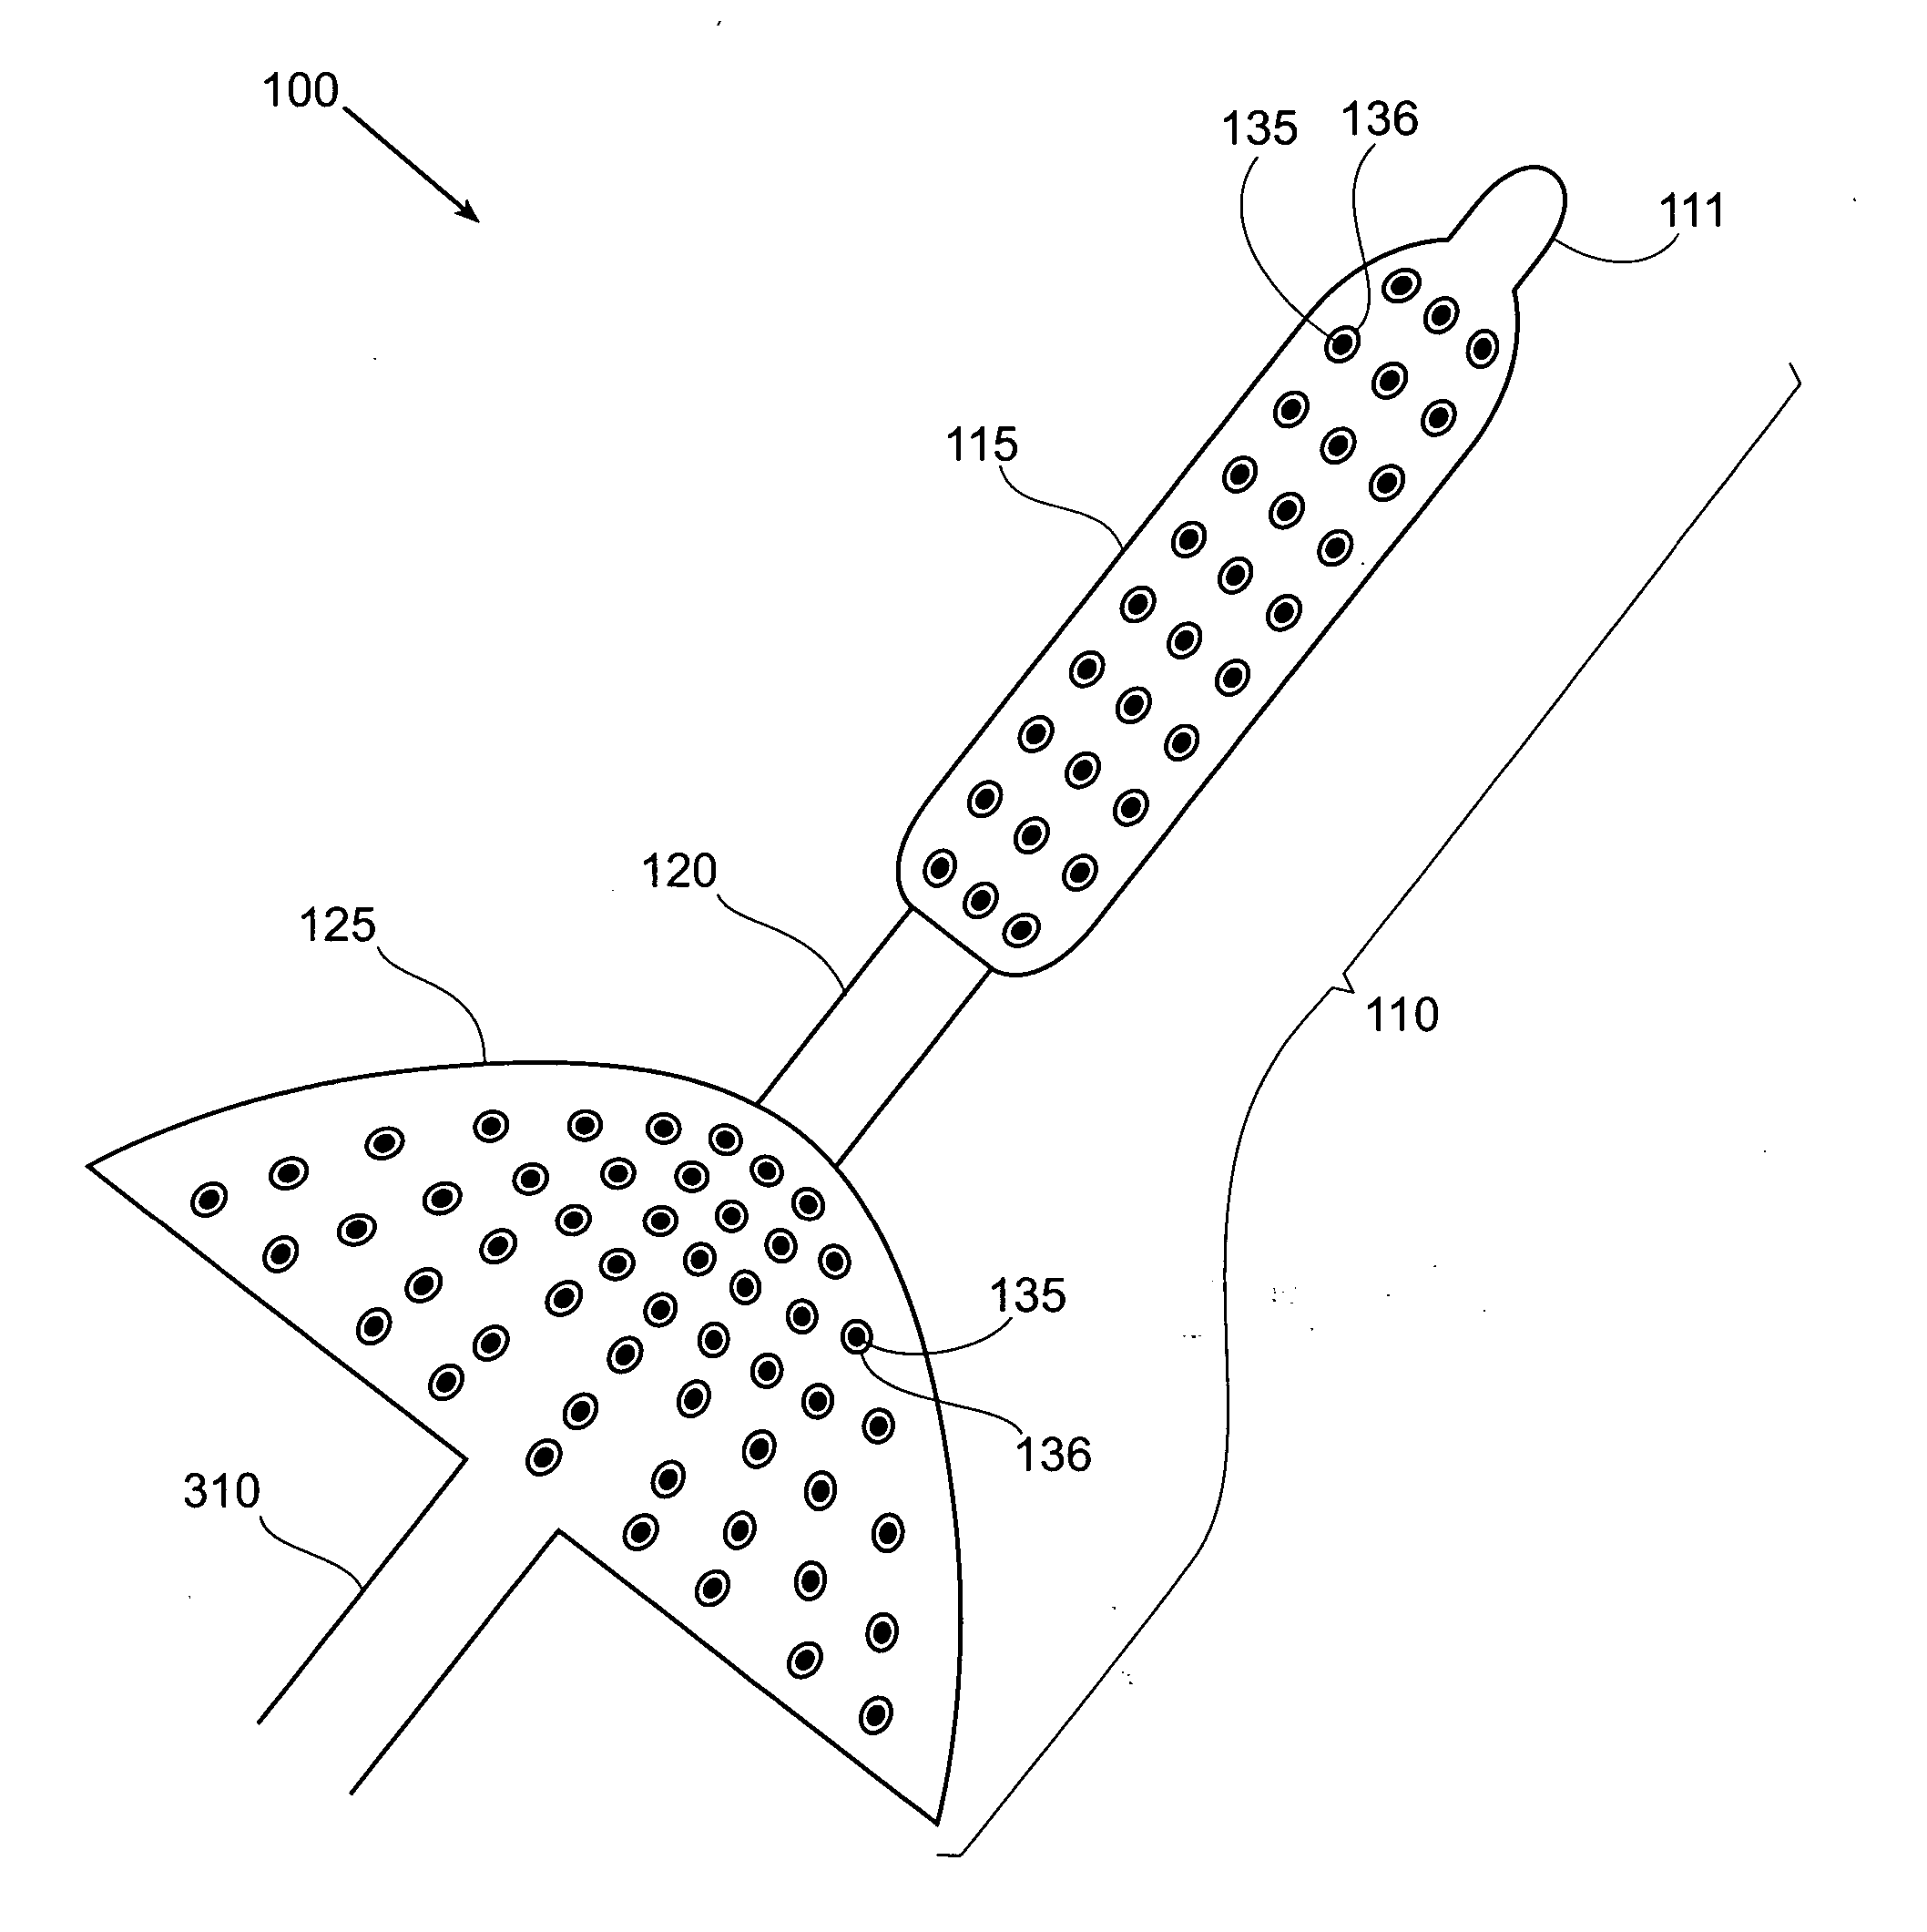 Surgical weight control device